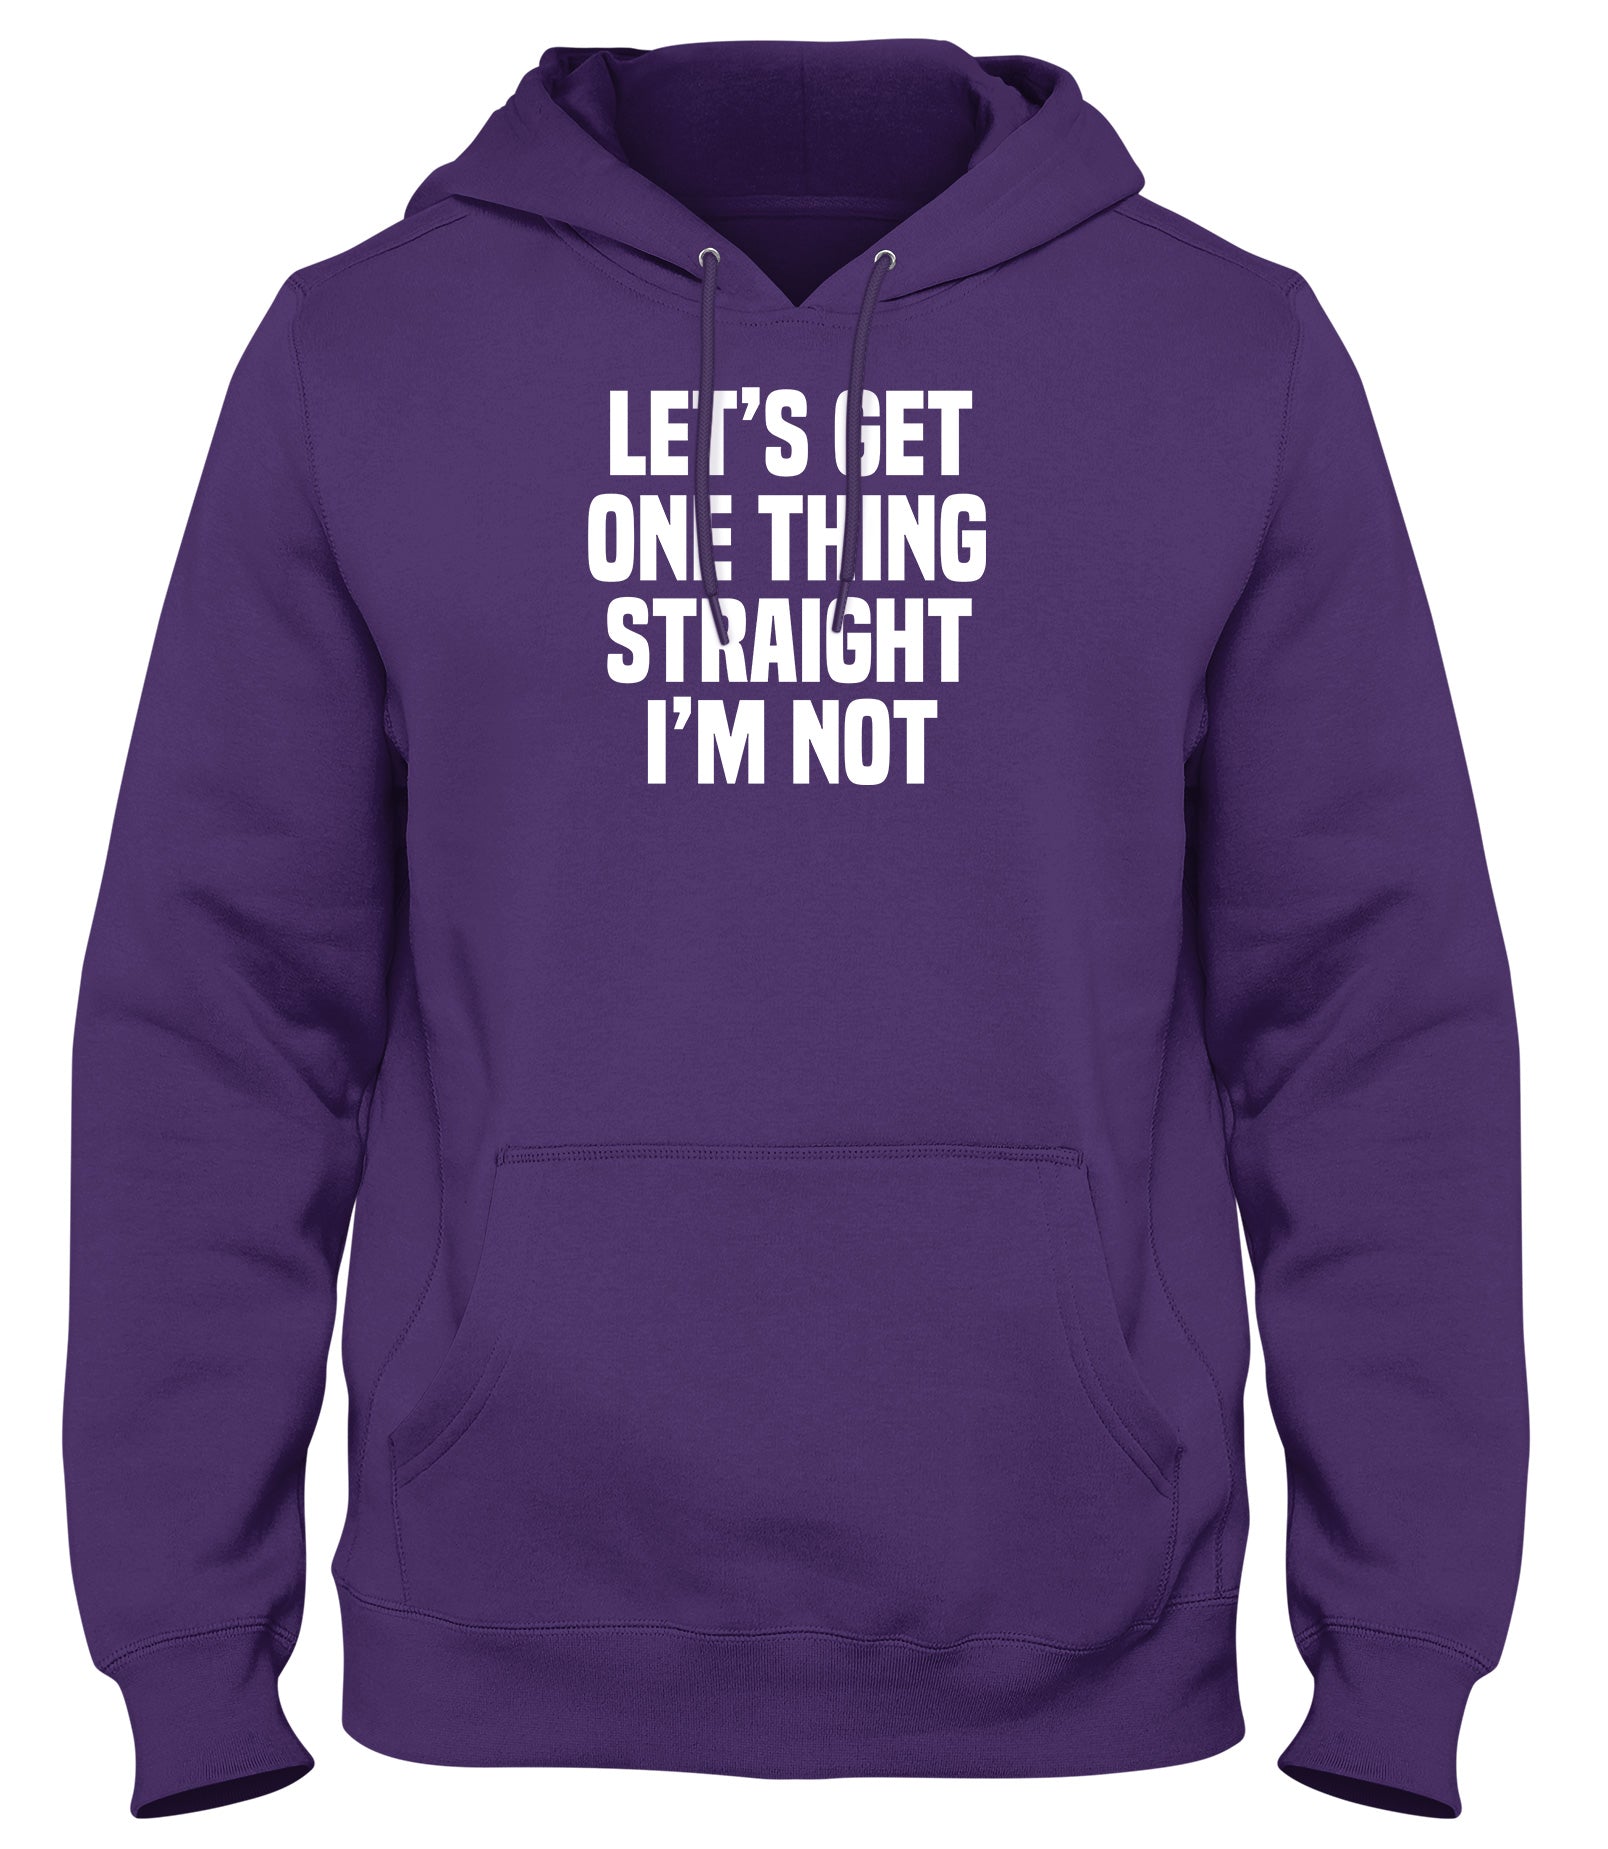 LET'S GET ONE THING STRAIGHT I'M NOT MENS WOMENS LADIES UNISEX FUNNY SLOGAN HOODIE